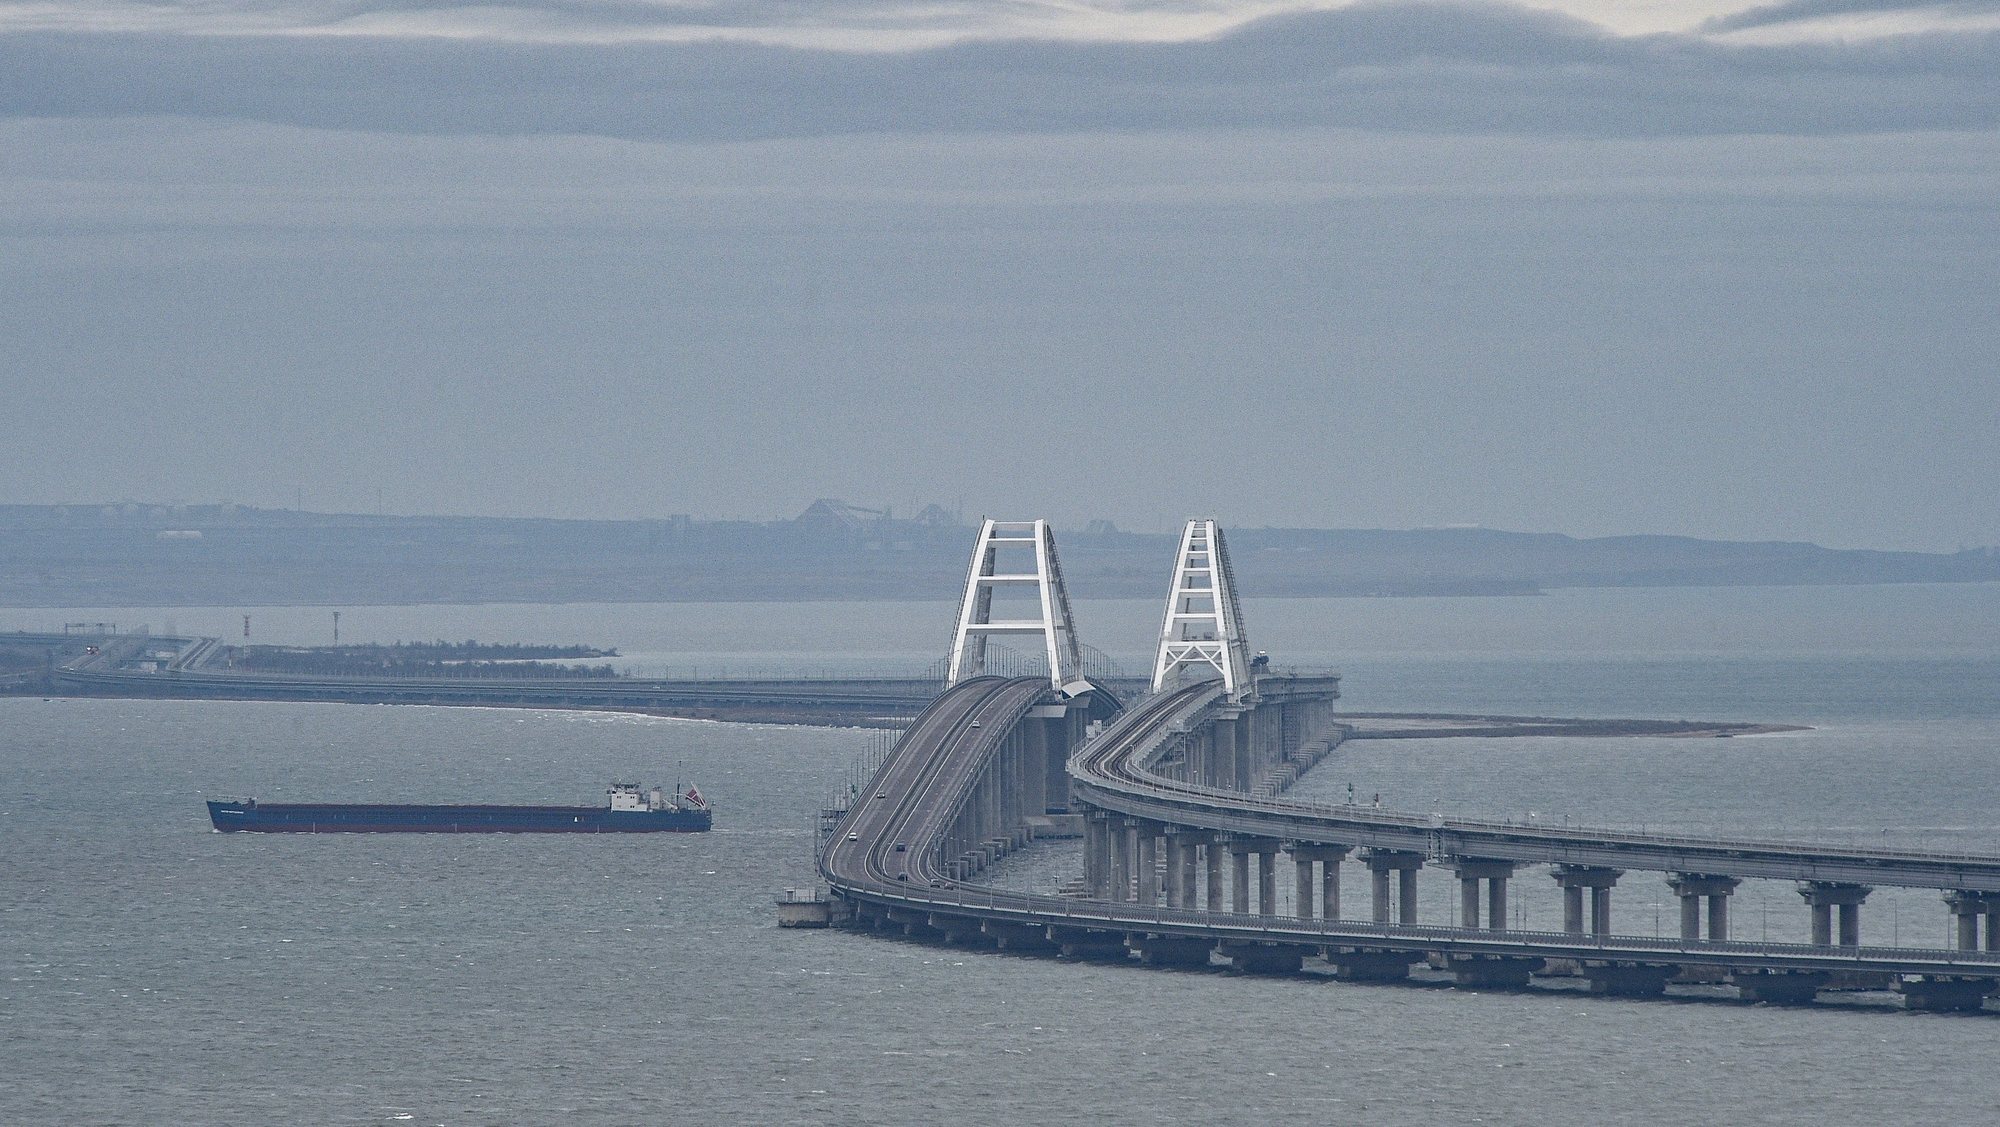 epa10524582 A general view of the Crimean Bridge in Kerch, Crimea, 14 March 2023 (issued 15 March 2023). The bridge connects the Russian mainland with the Crimean Peninsula across the Kerch Strait. In February 2014 Russian forces invaded and seized control of the Crimean Peninsula. Russia declared the annexation of Crimea on 18 March 2014, two days after the celebration of a so called &#039;referendum&#039; in that territory. In a vote that reaffirmed Ukraine&#039;s &#039;national unity and territorial integrity&#039;, the United Nations General Assembly in the Resolution 68/262 condemned the referendum in Crimea stating it had &#039;no validity&#039;. After the annexation Moscow escalated its military presence on the peninsula to solidify the new status quo on the ground and since 2015, Russia approved the &#039;Day of Reunification of Crimea with Russia&#039; as a holiday marked annually on 18 March.  EPA/STRINGER